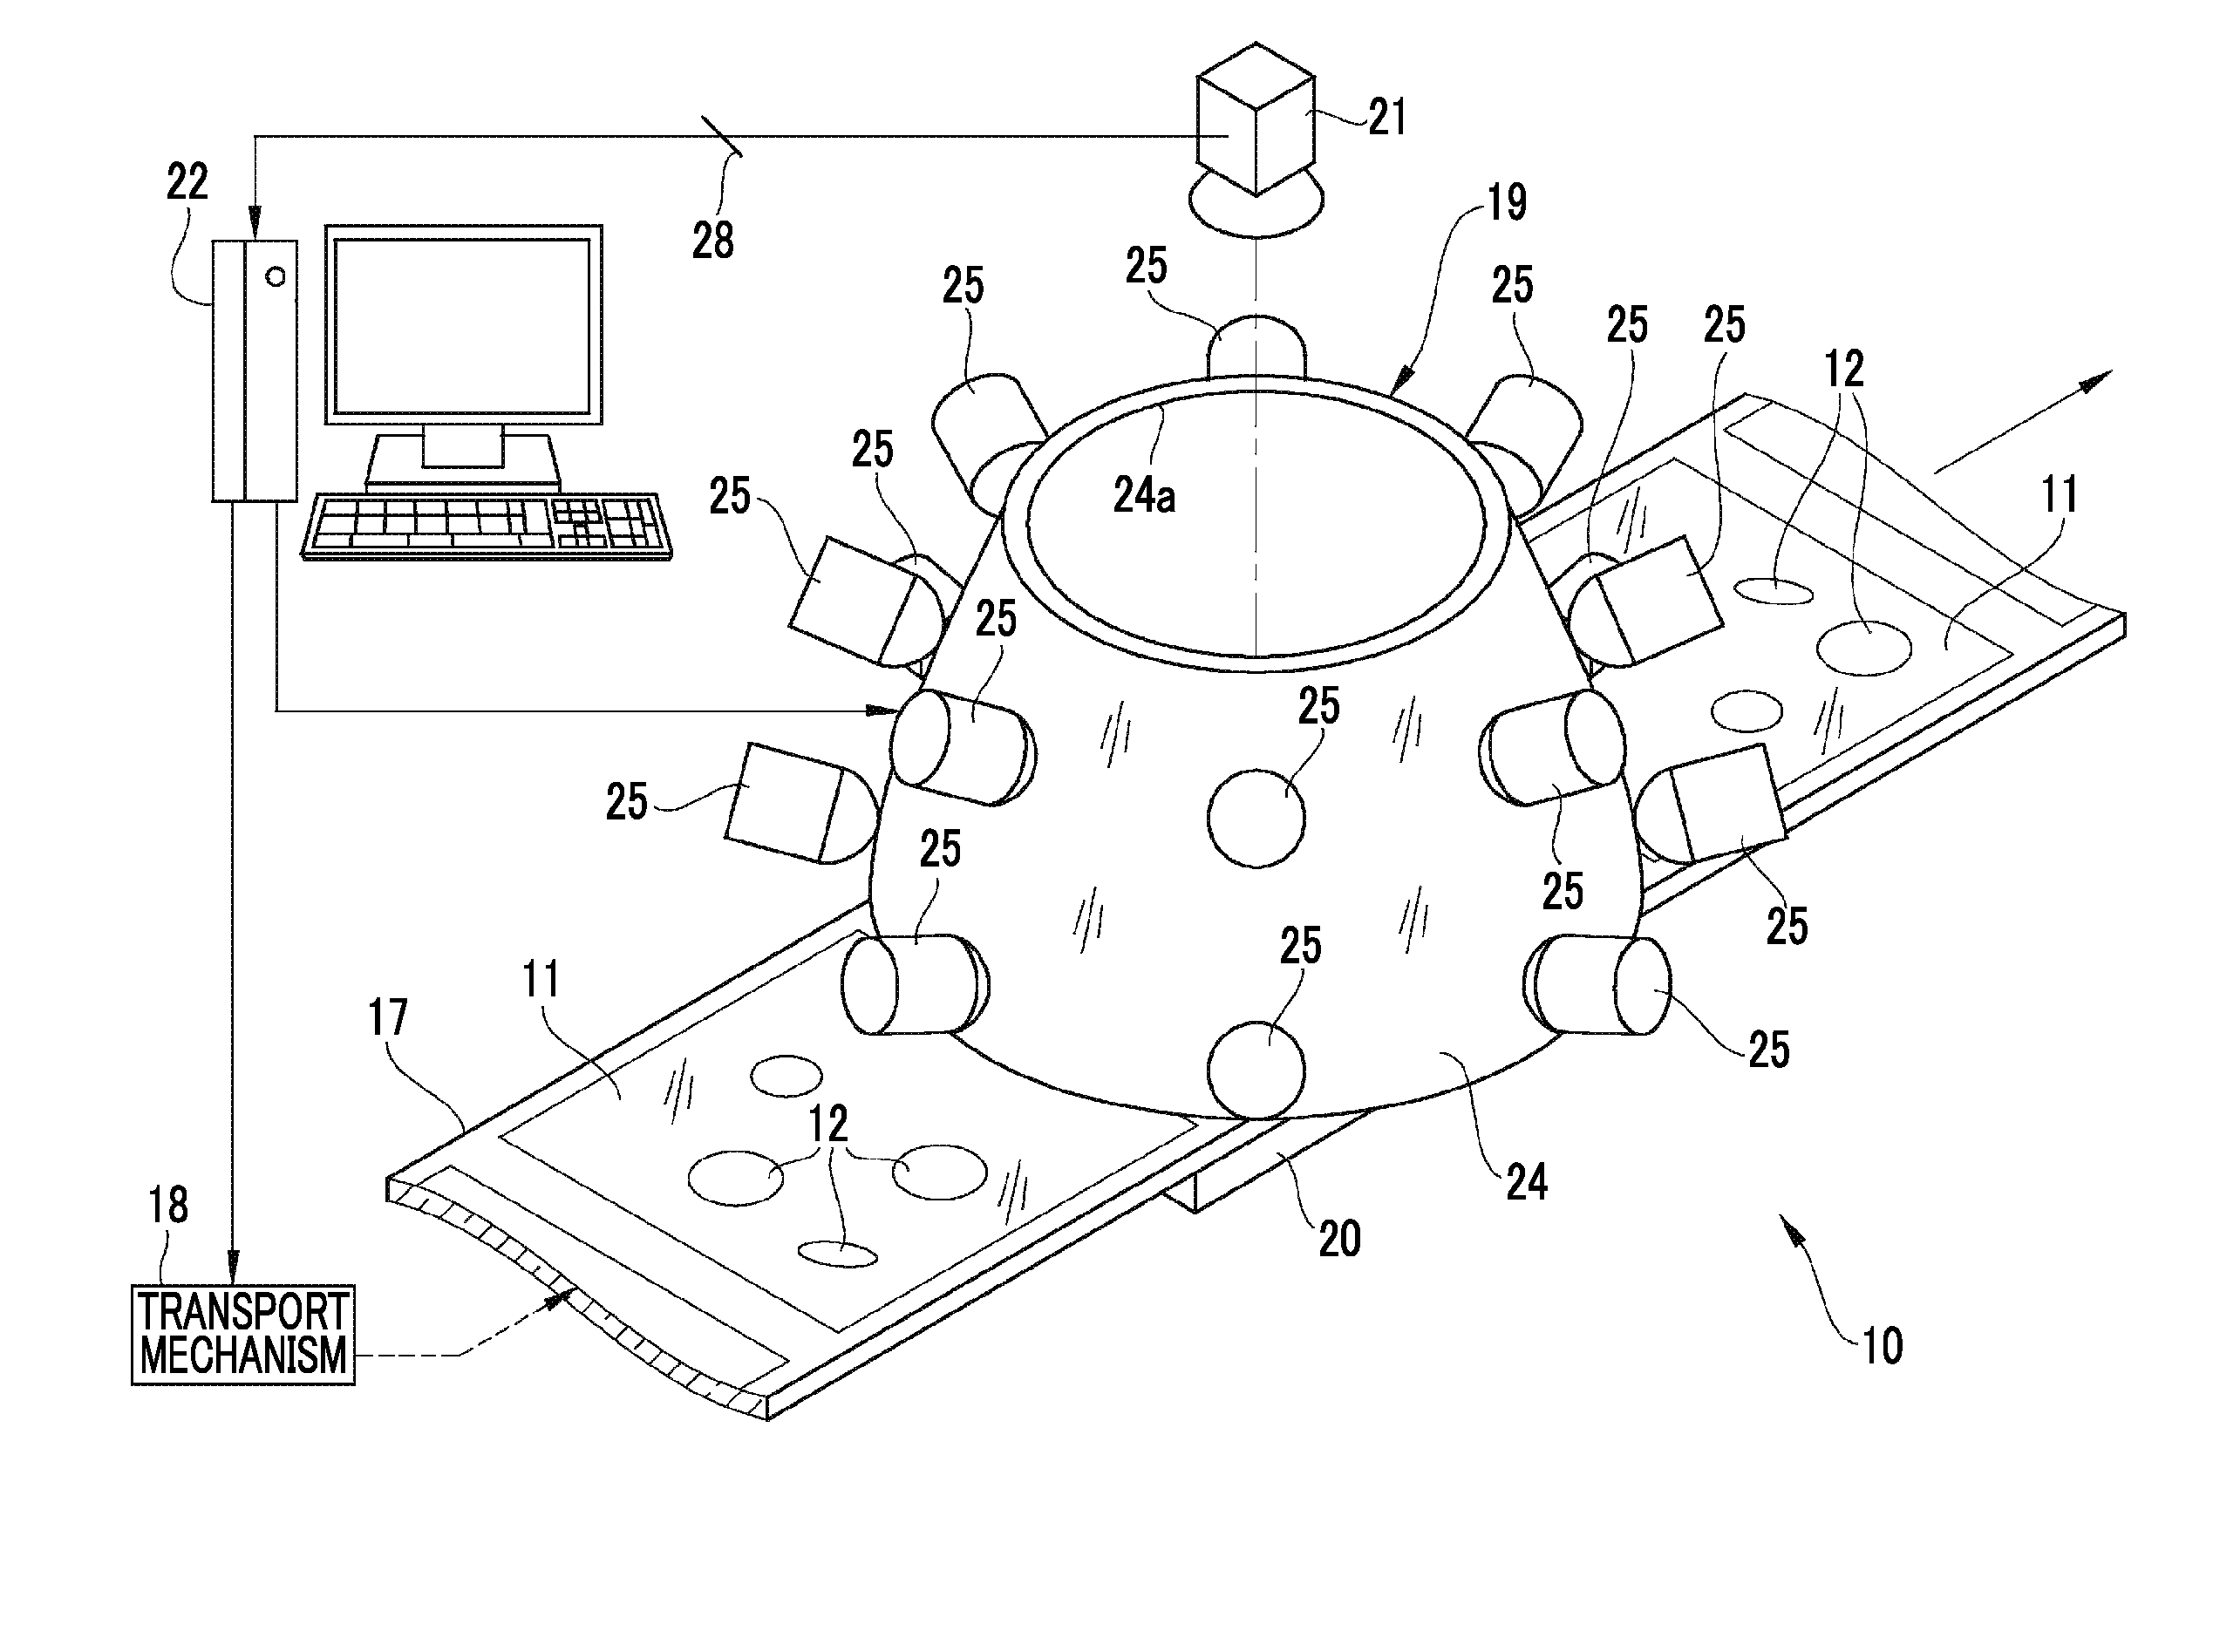 Drug recognition device and method